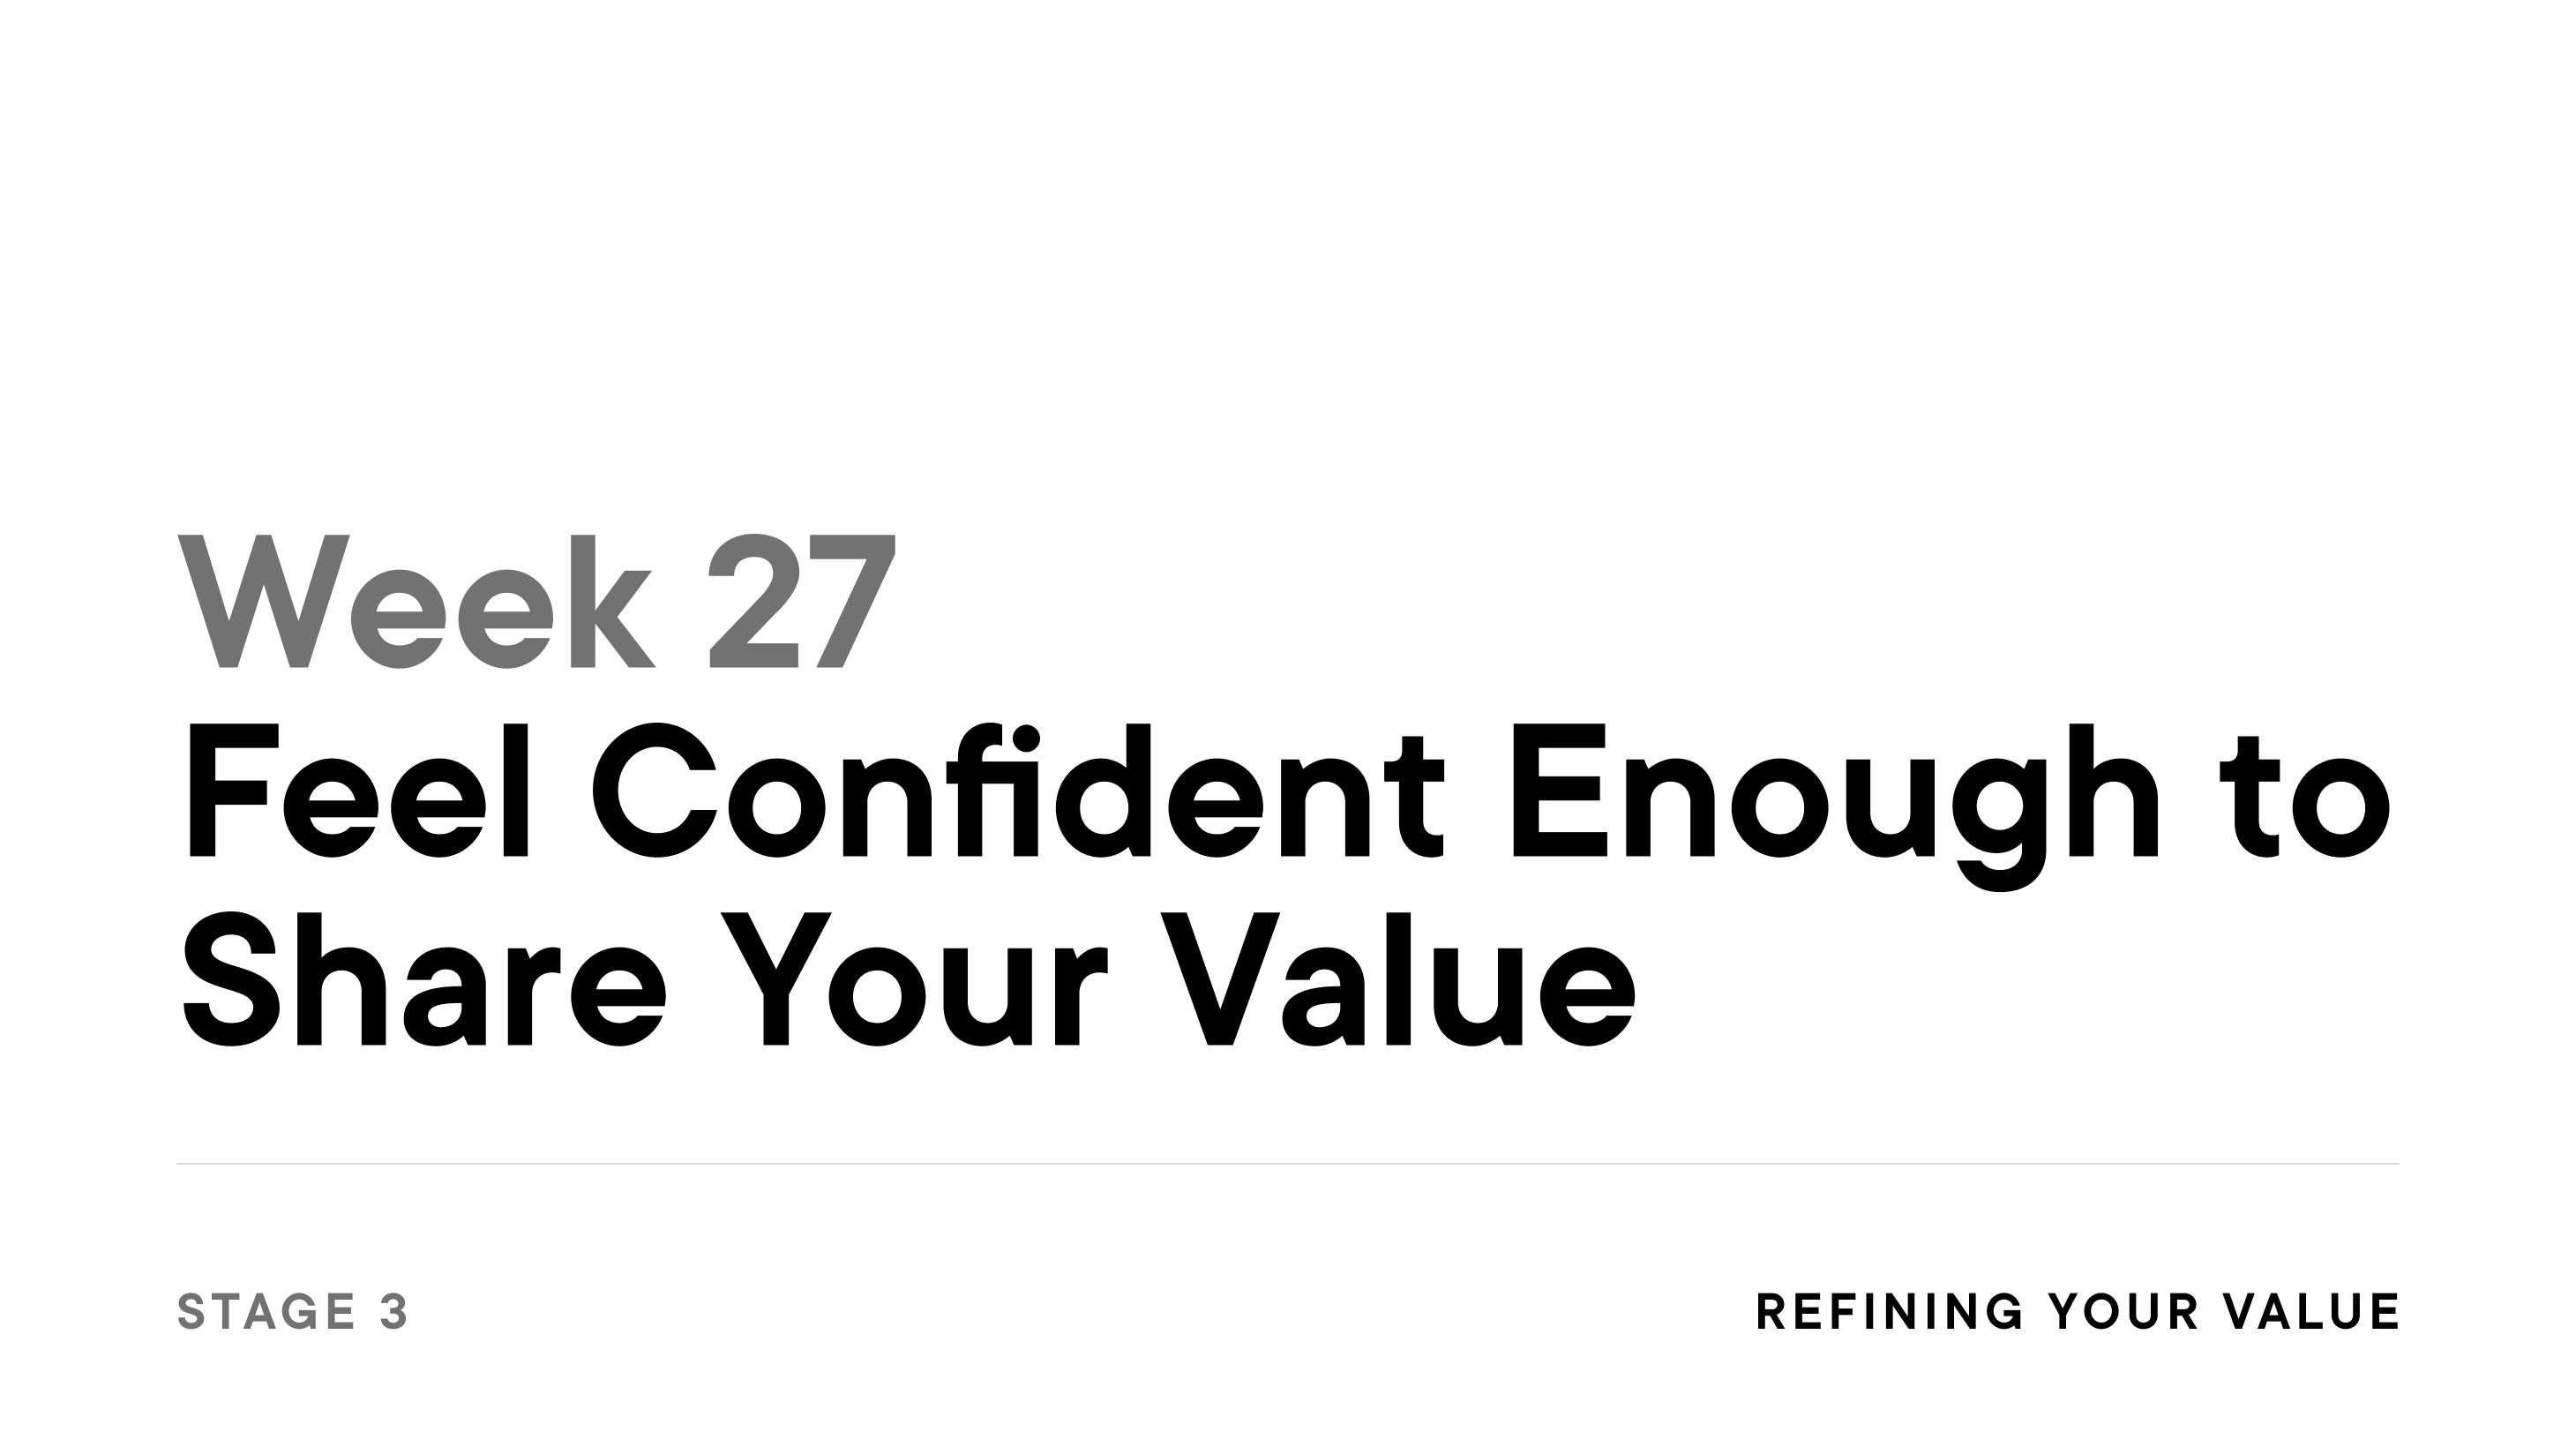 Week 27: Feel Confident Enough to Share Your Value